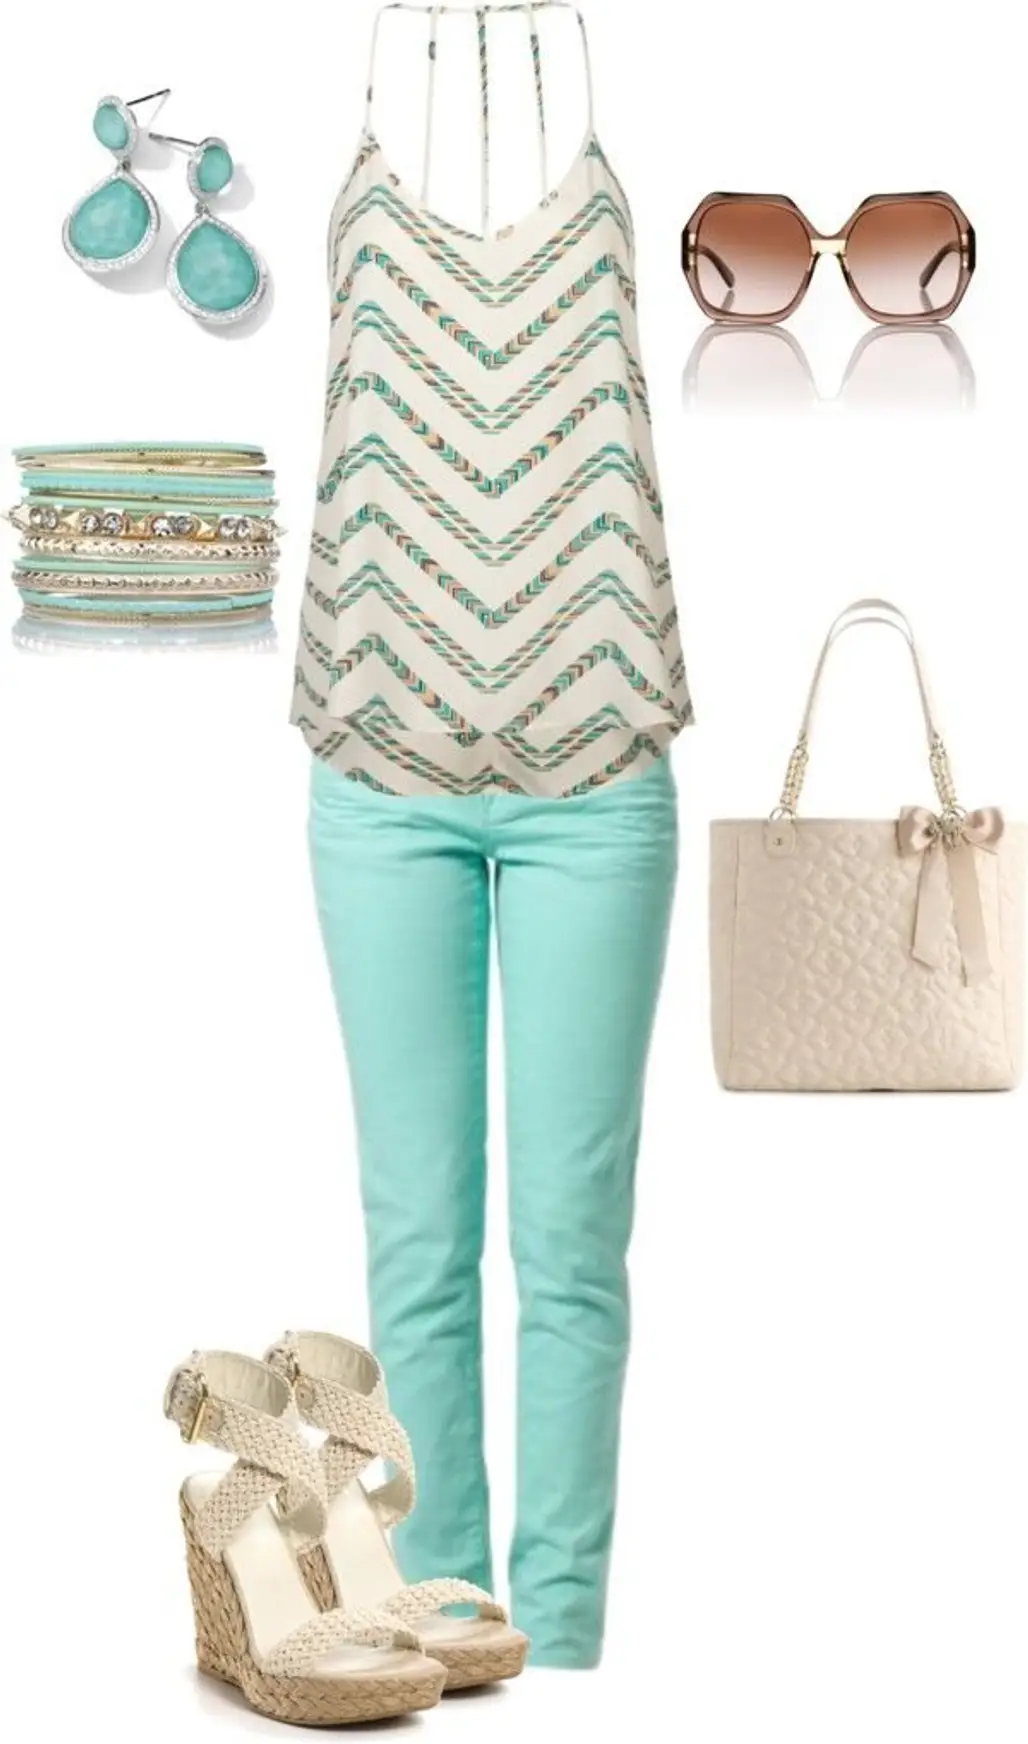 Tiffany Blue Outfit